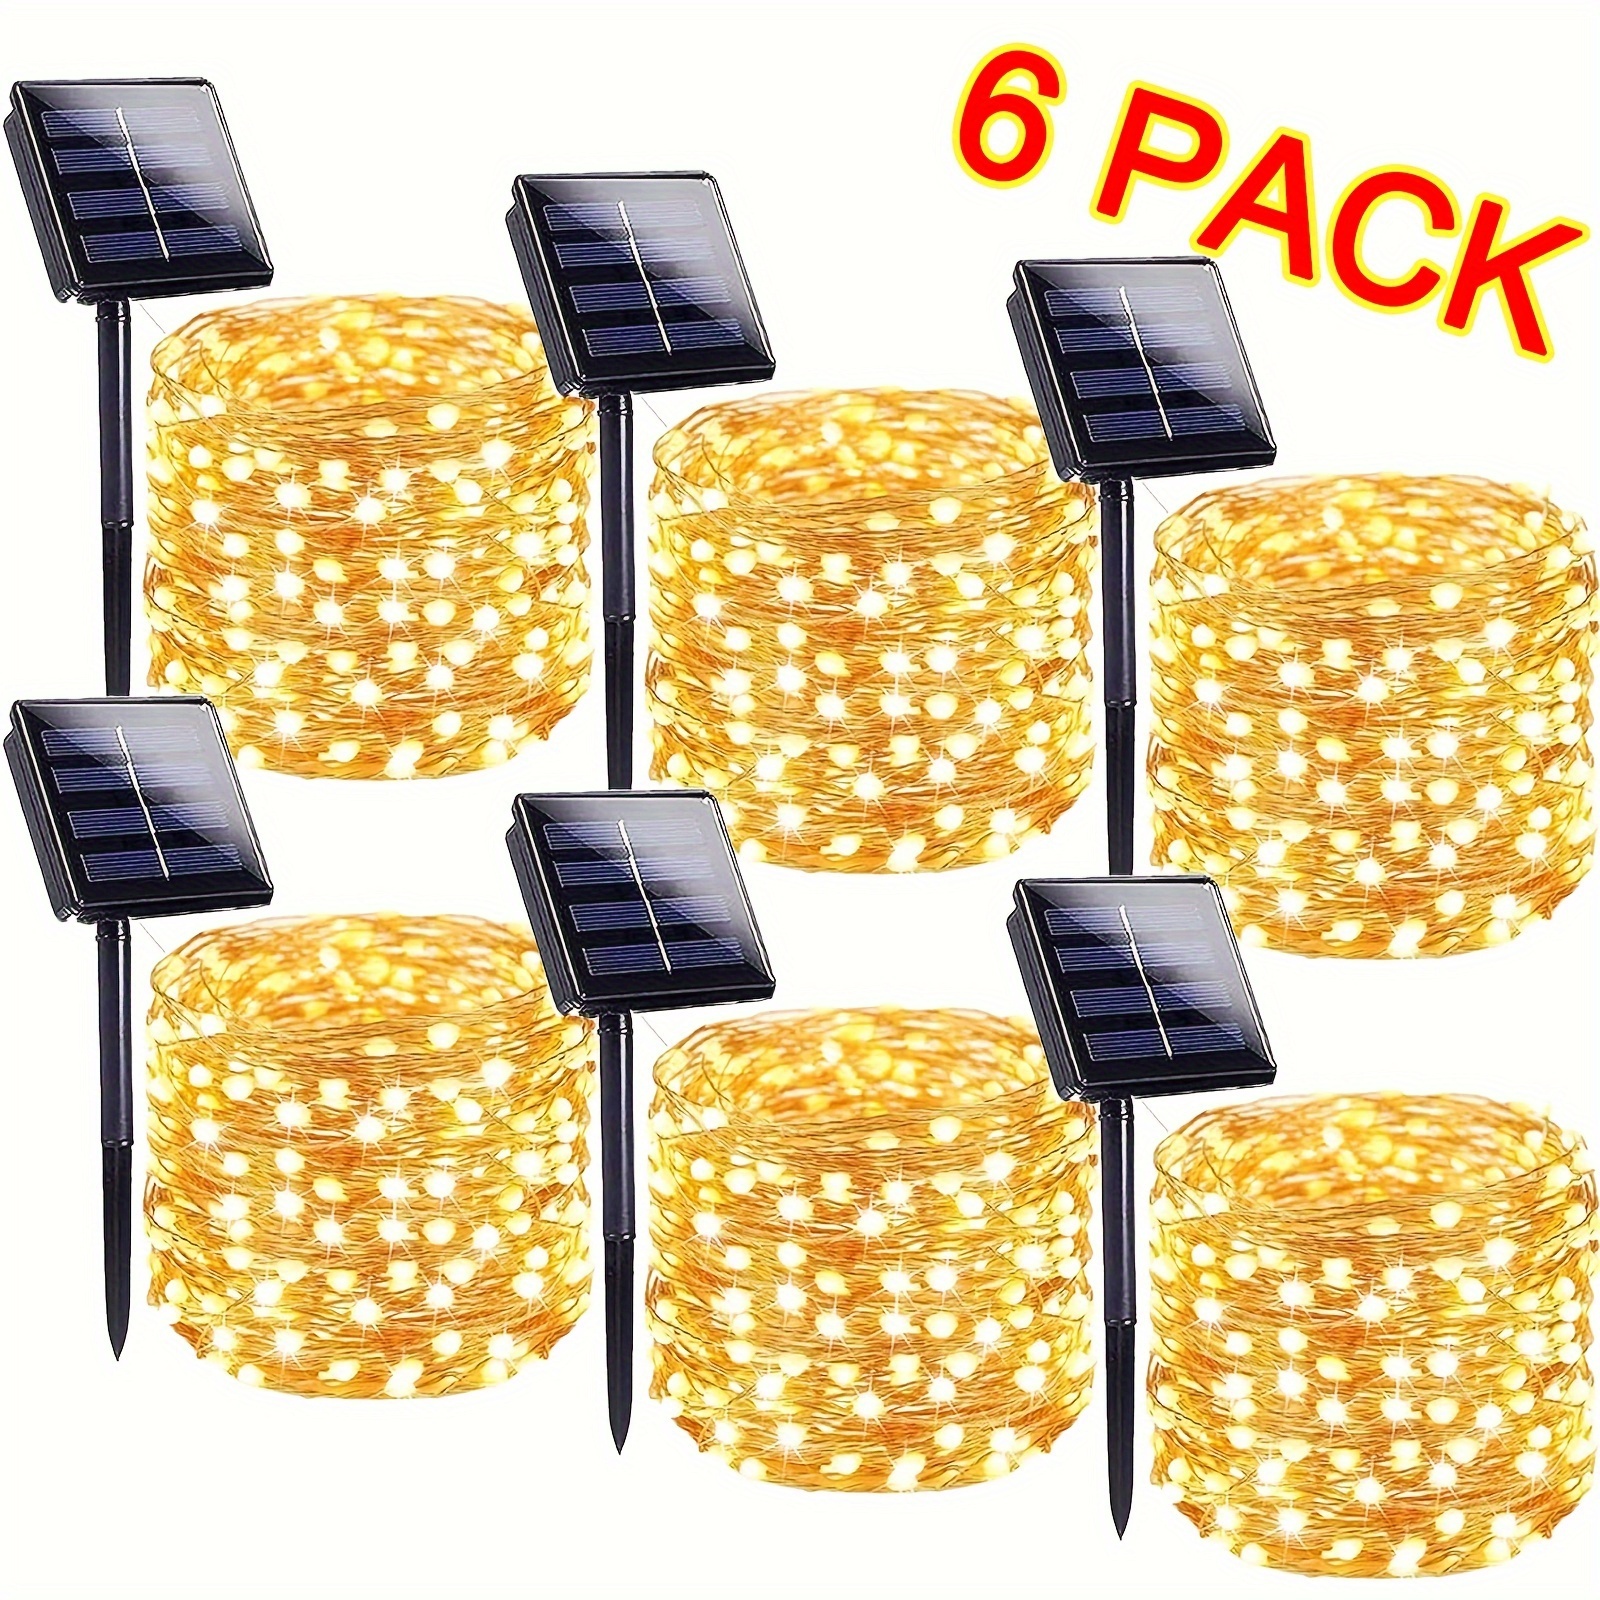 

6 Pack Solar String Lights Extra-long 600led Solar Lights Outdoor Ip65 Waterproof Solar Twinkle Light Copper Wire 8 Modes Solar Fairy Lights For Xmas Tree Garden Party Wedding (white/ Warm/ Colorful)